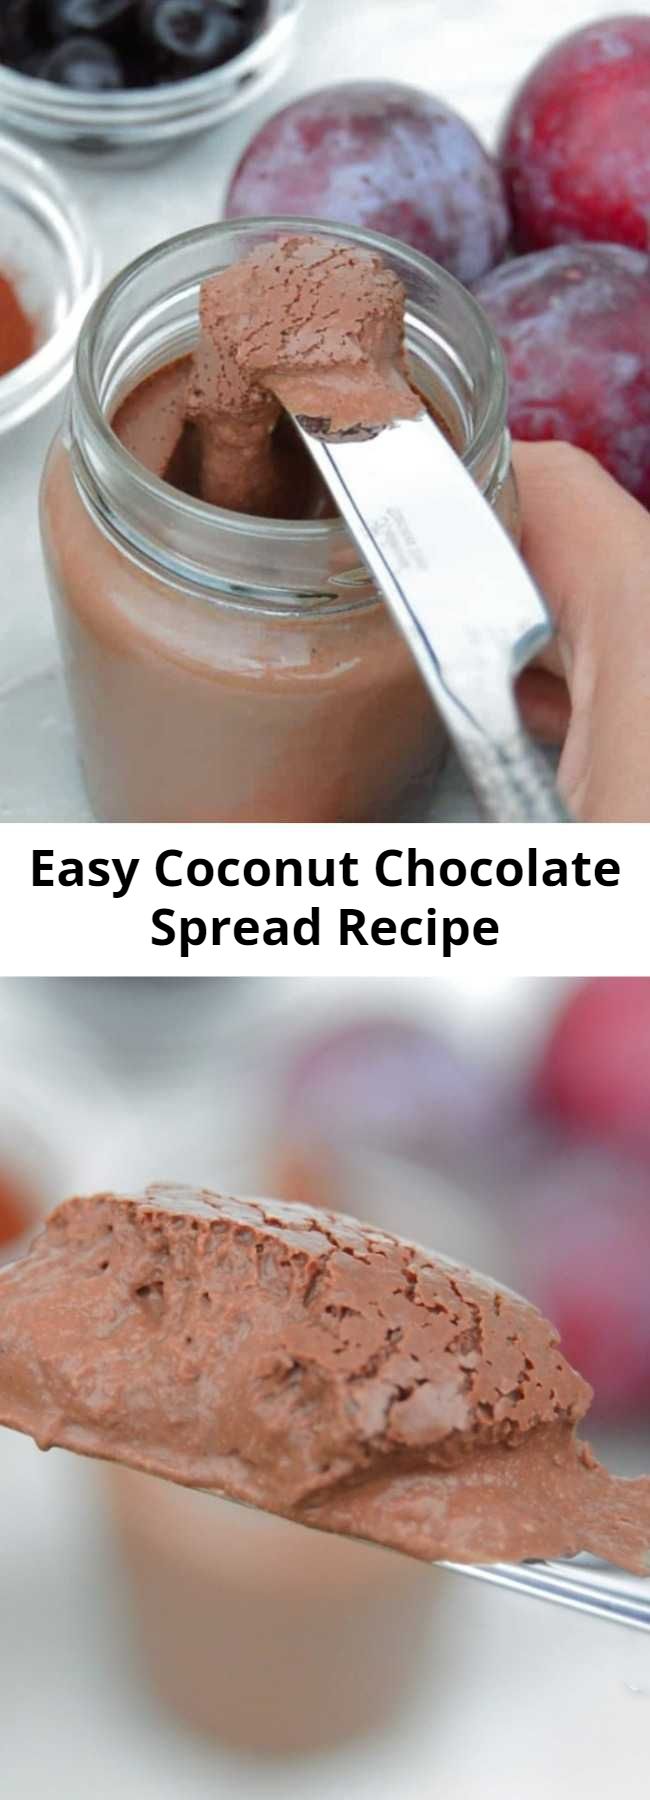 Easy Coconut Chocolate Spread Recipe - Dairy free chocolate spread that takes a few minutes to make. Perfect on hot bread, crackers or just eaten with a spoon. Rich and creamy thanks to coconut that gives an amazing taste and texture. #vegan #chocolate #chocolatespread #veganrecipe